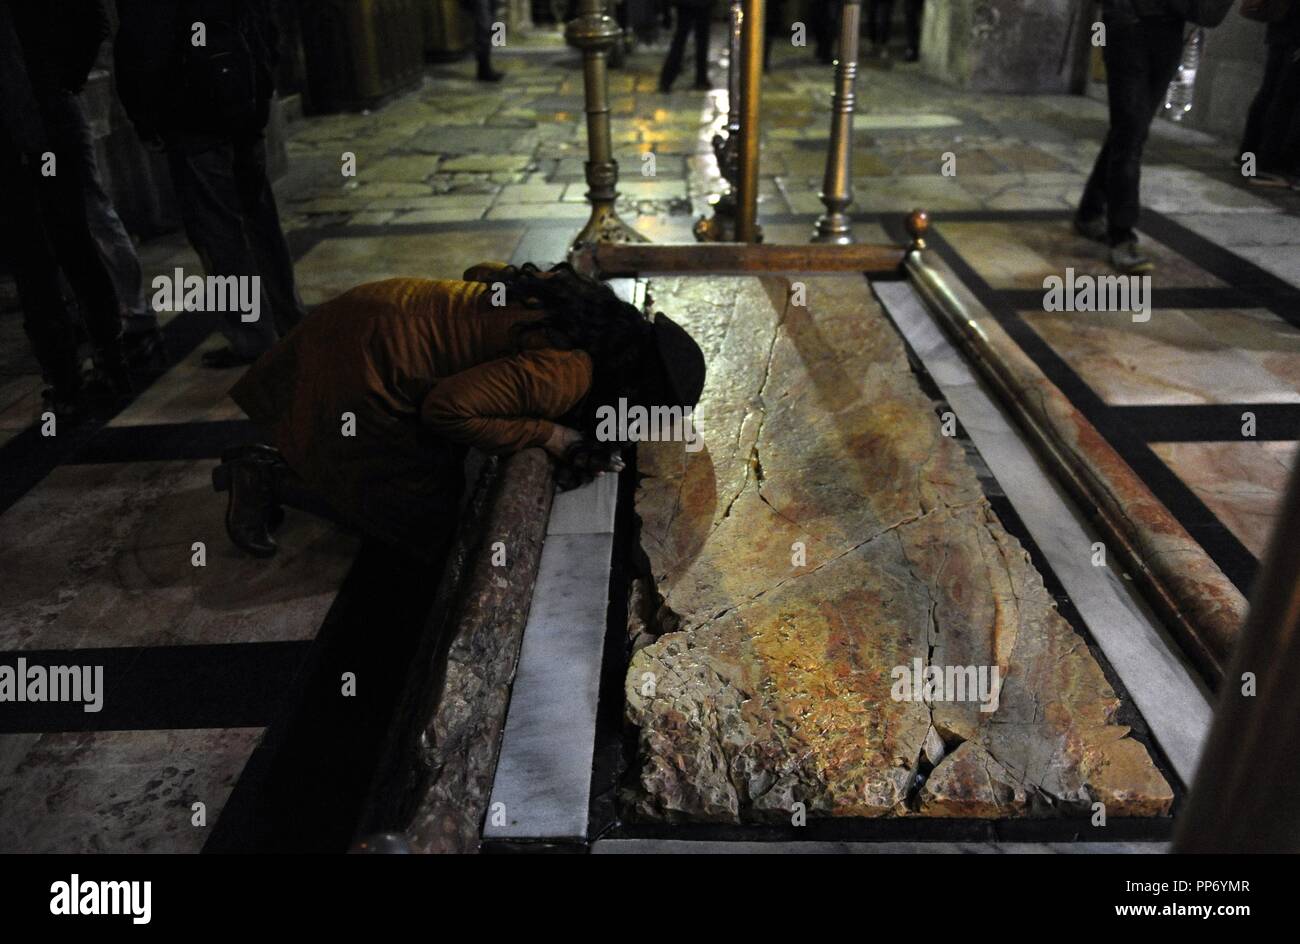 Israel. Jerusalem. Church of the Holy Sepulchre. Stone of the Anointing or Unction, where Nicodemus and Joseph of Arimathea prepared the body of Jesus for burial. Old City. Stock Photo